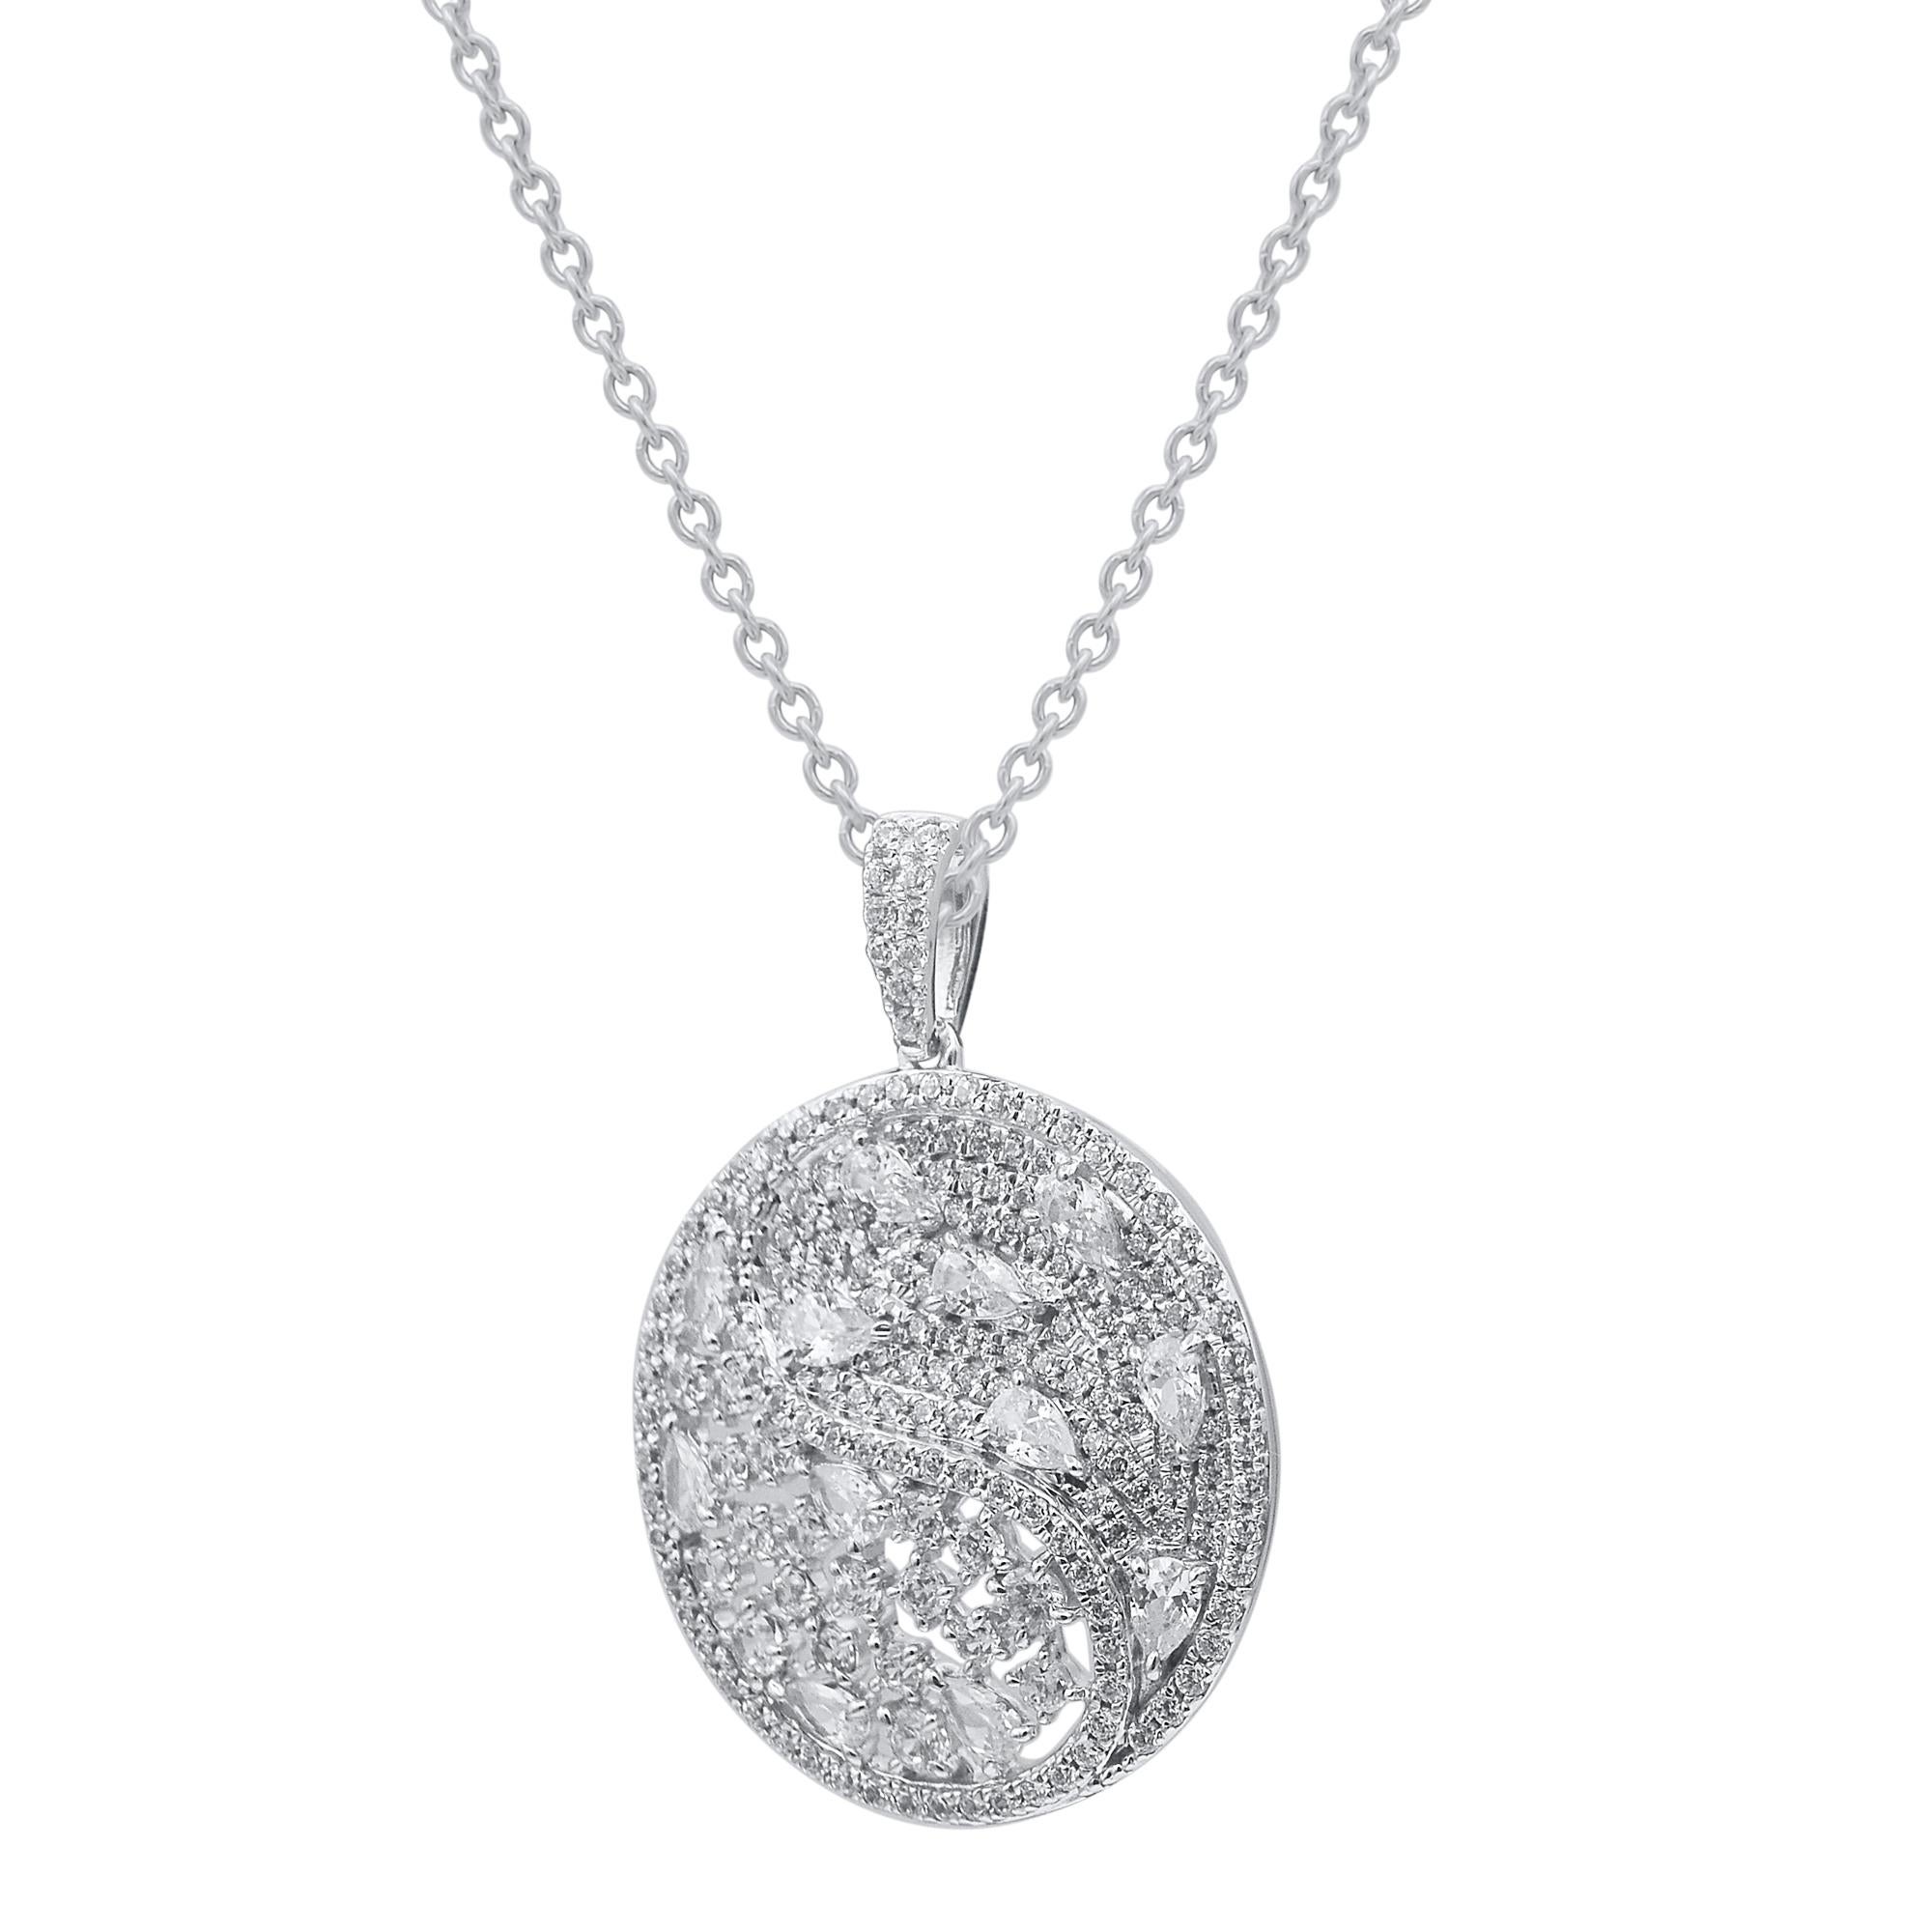 This diamond circle pendant fits any occasion with ease. These diamond pendants are studded with 184 single cut, brilliant cut & pear natural diamonds in prongs setting and crafted in 14 karat white gold. Diamonds are graded as H-I color and I-2